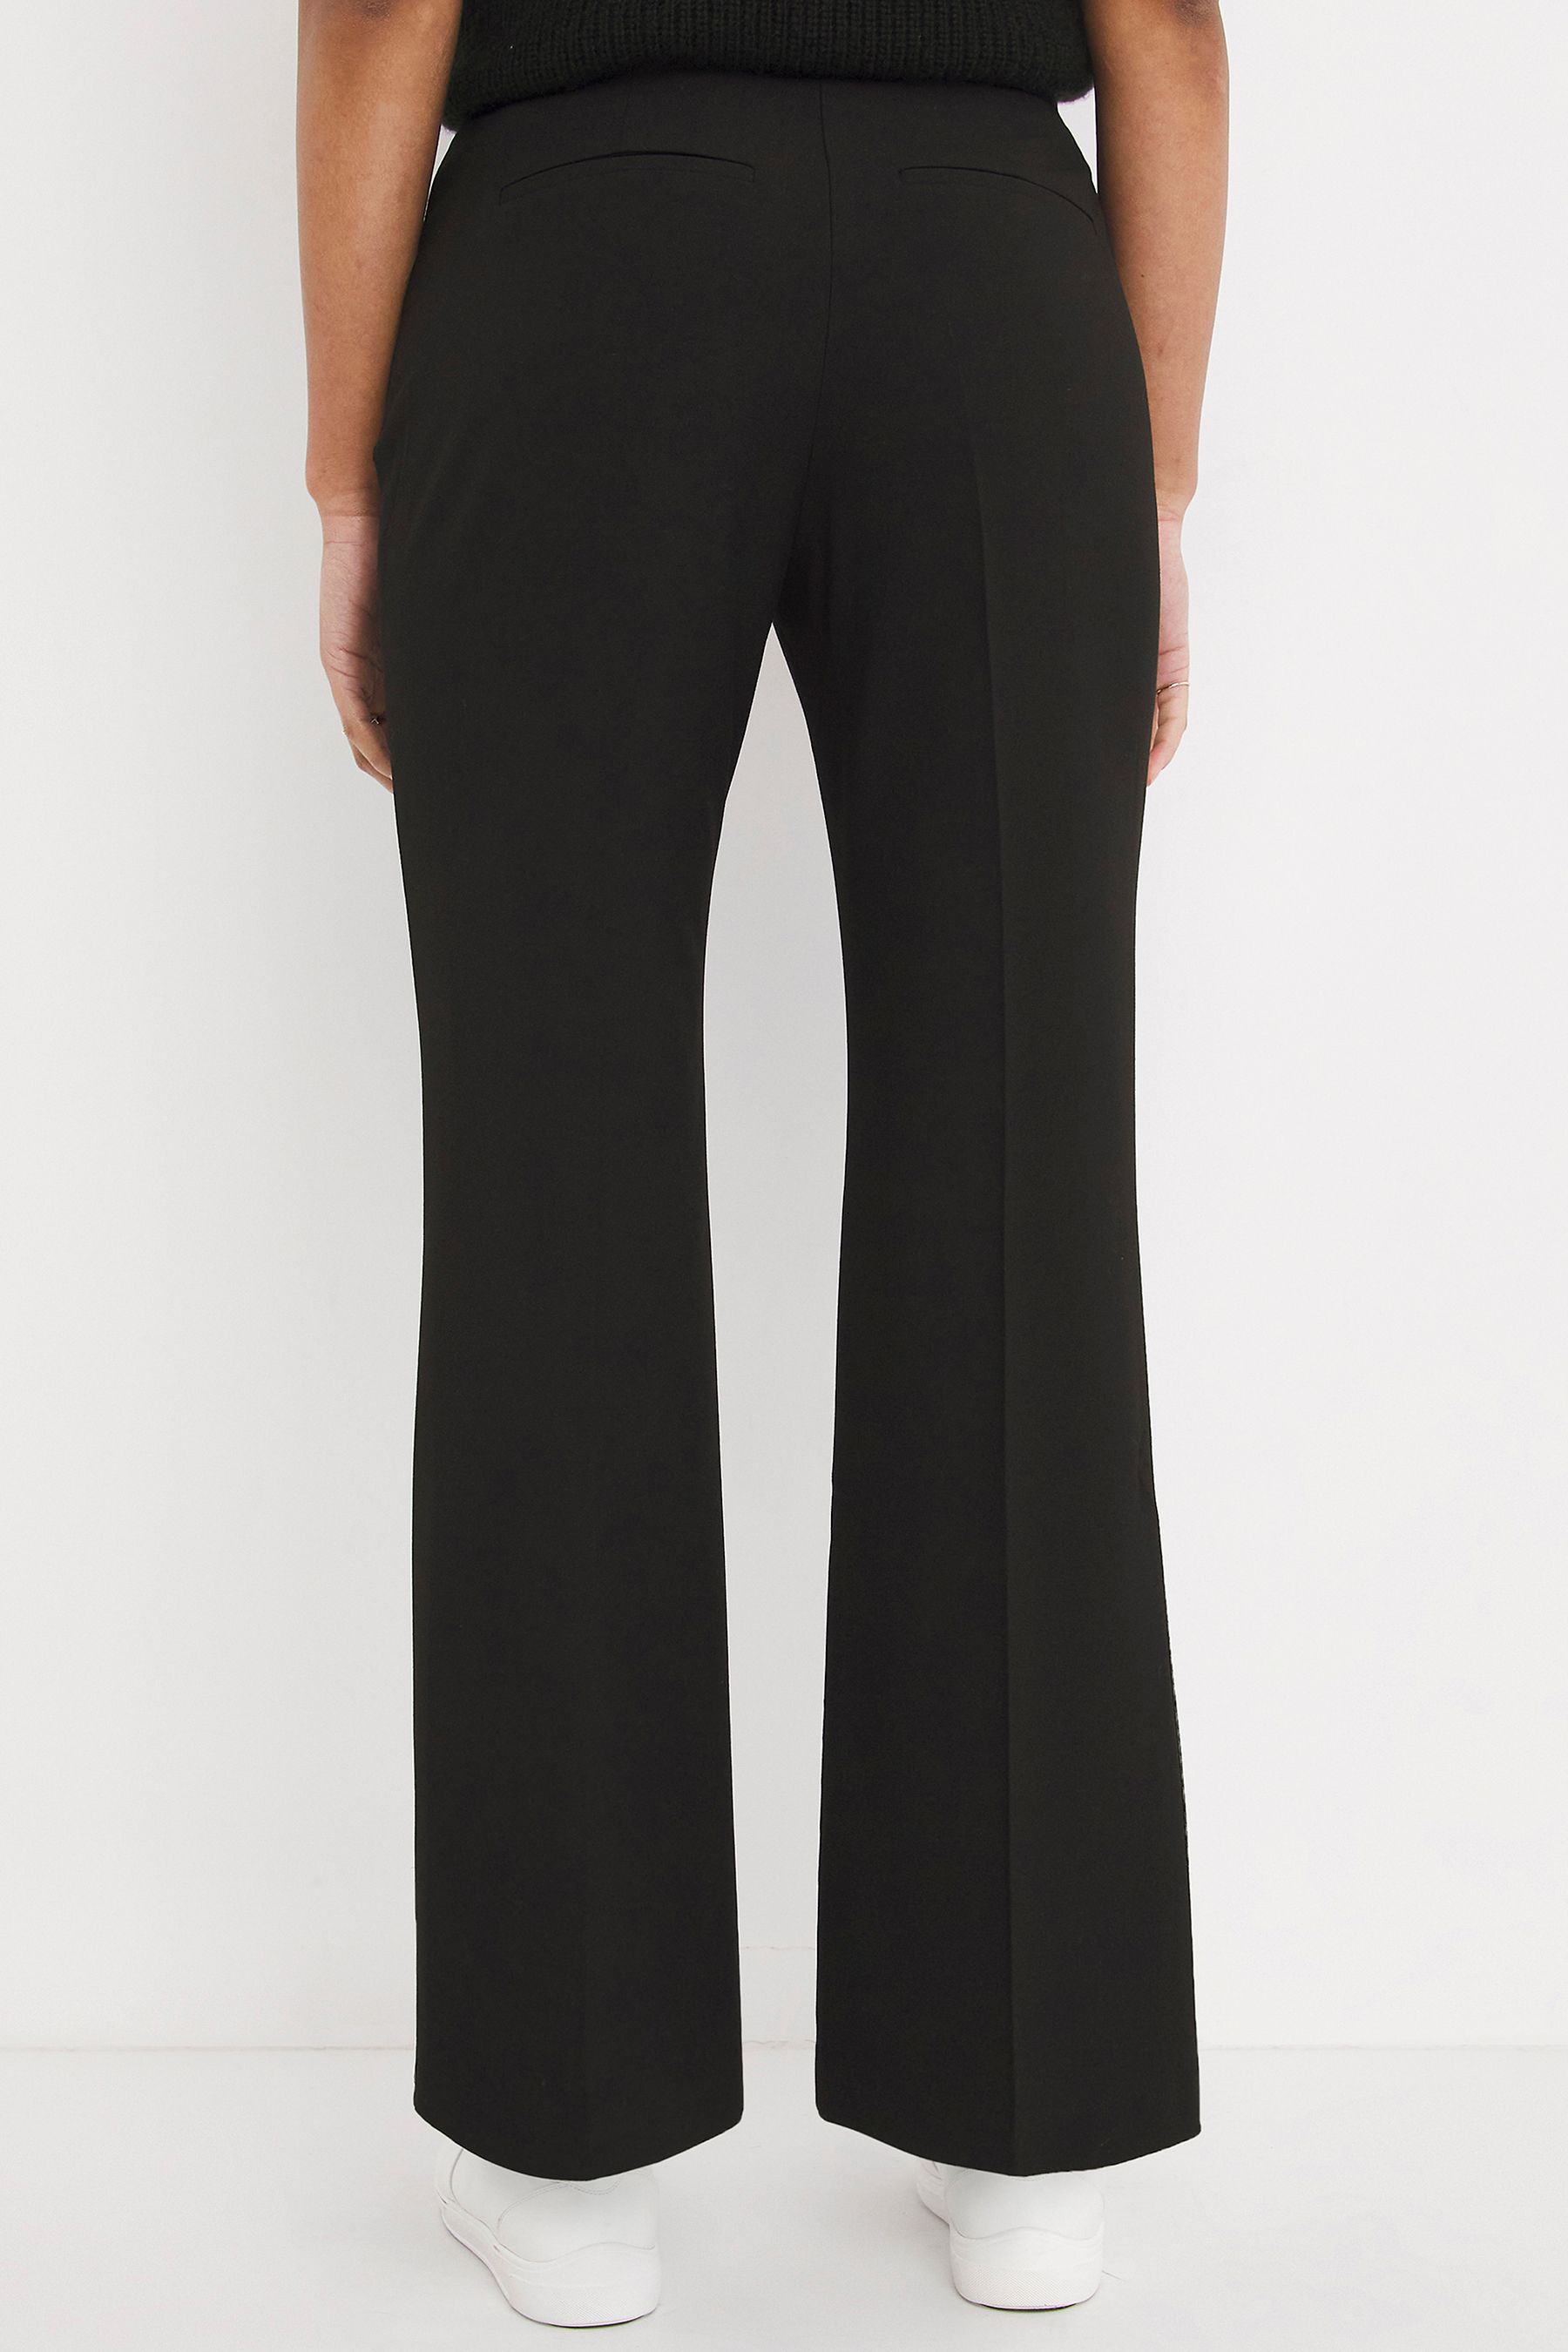 Buy JD Williams Magisculpt Black Bootcut Trousers – Long Length from ...